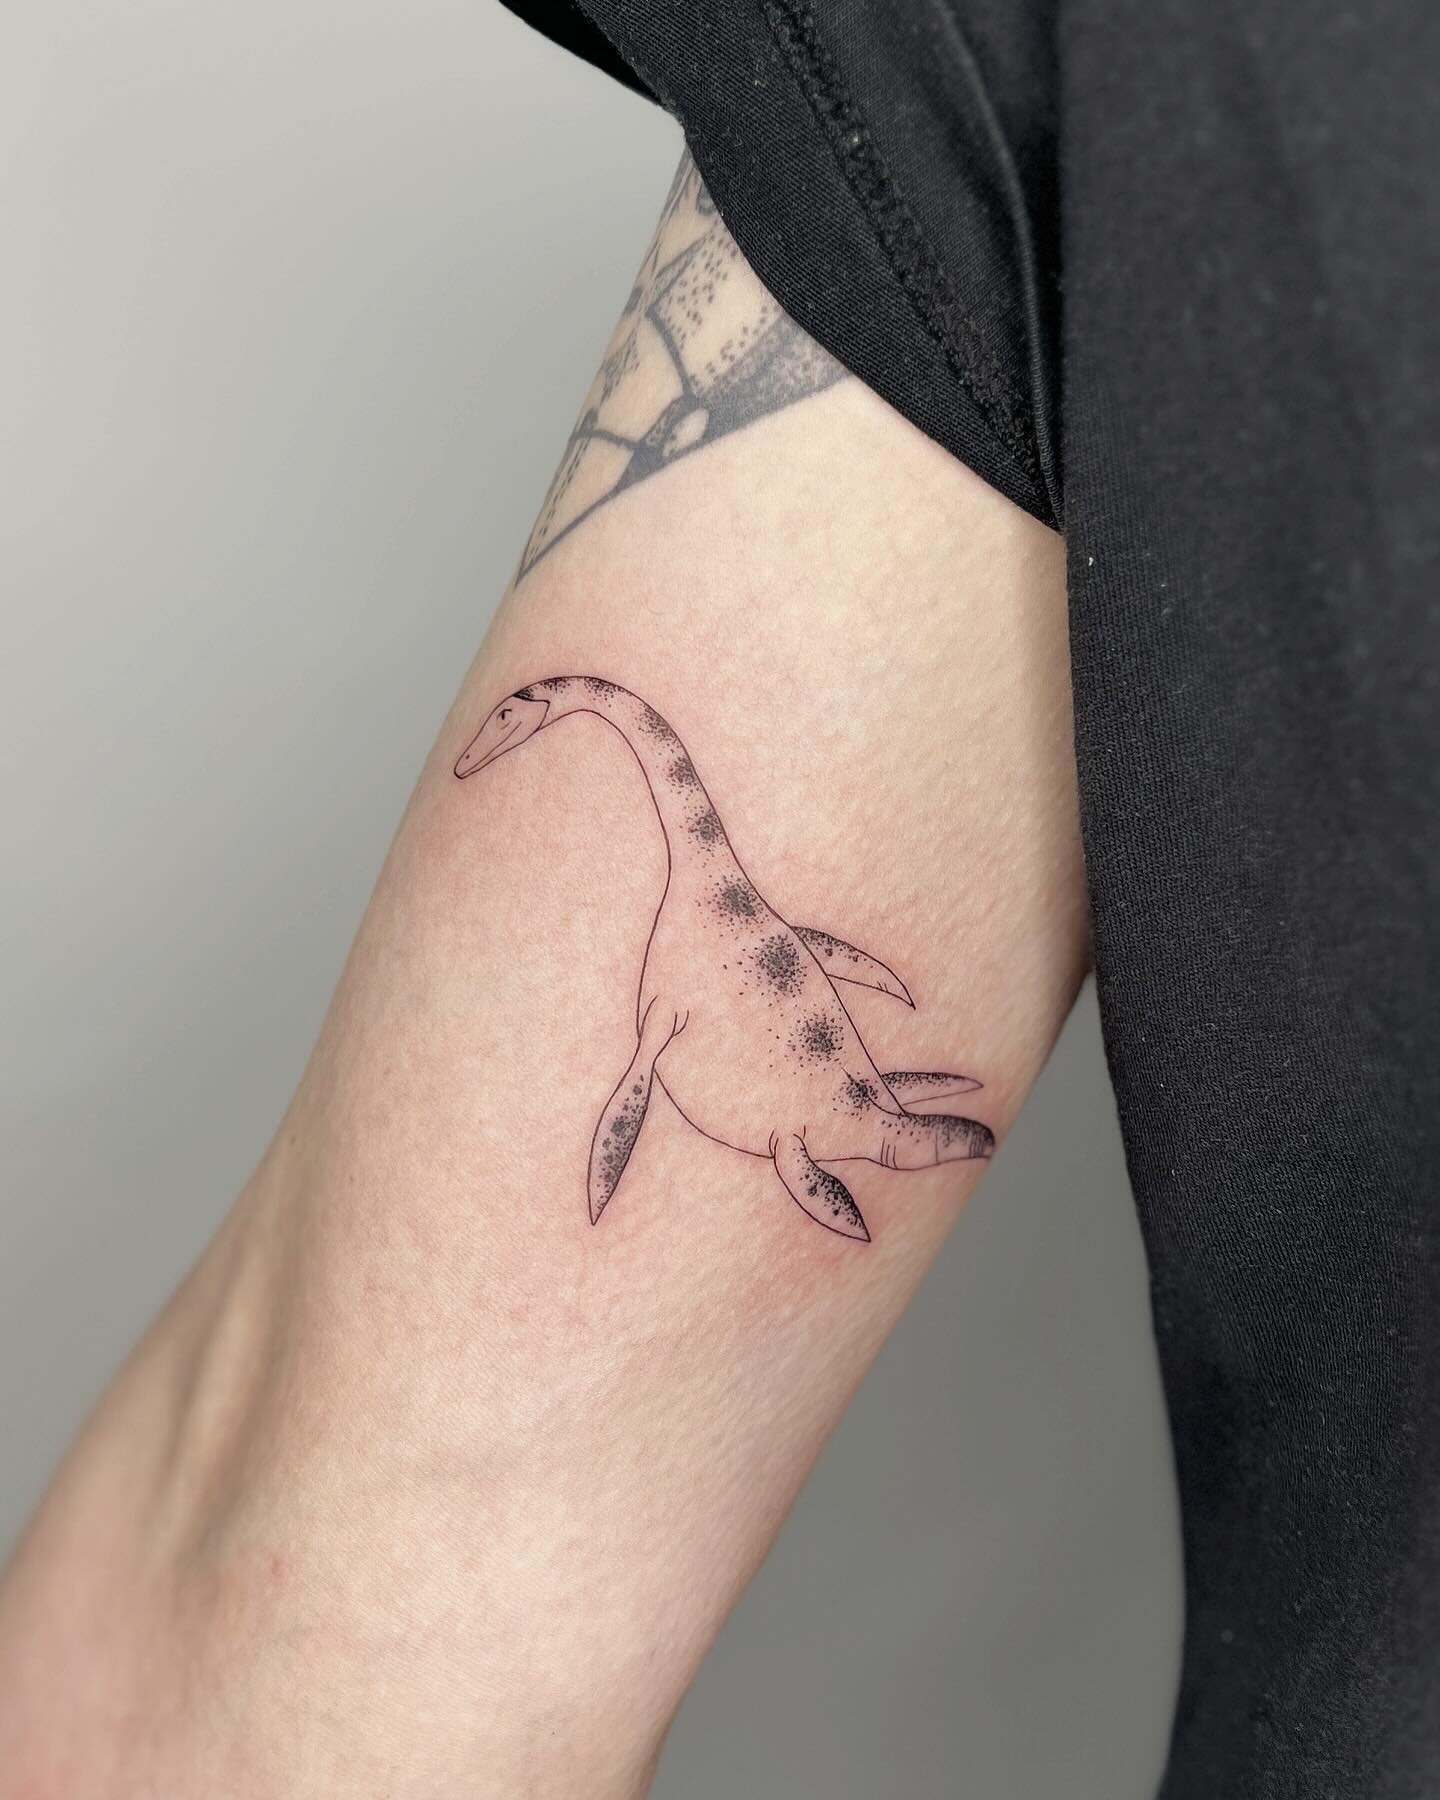 Big Plesio 💞
Thank you Birk! 🦕🐍
#plesiosaur 

⫸ 
Booking info: If you want to get inked, please stay patient for custom ideas. My books are closed till June 2024. New dates will be  announced soon 🫶🏻 #nodms